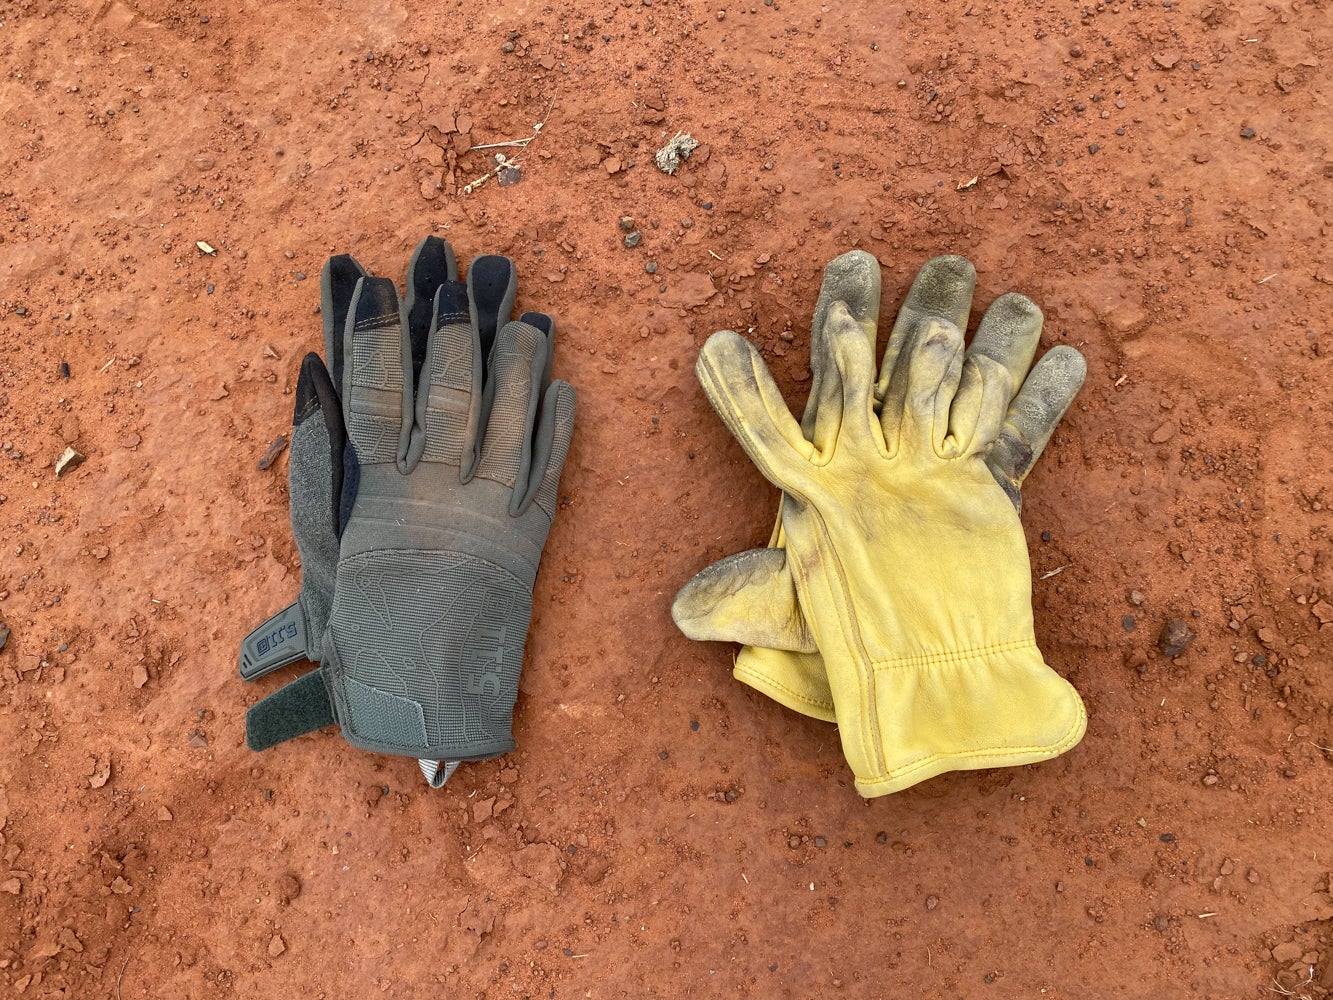 Two pairs of gloves in the dirt.